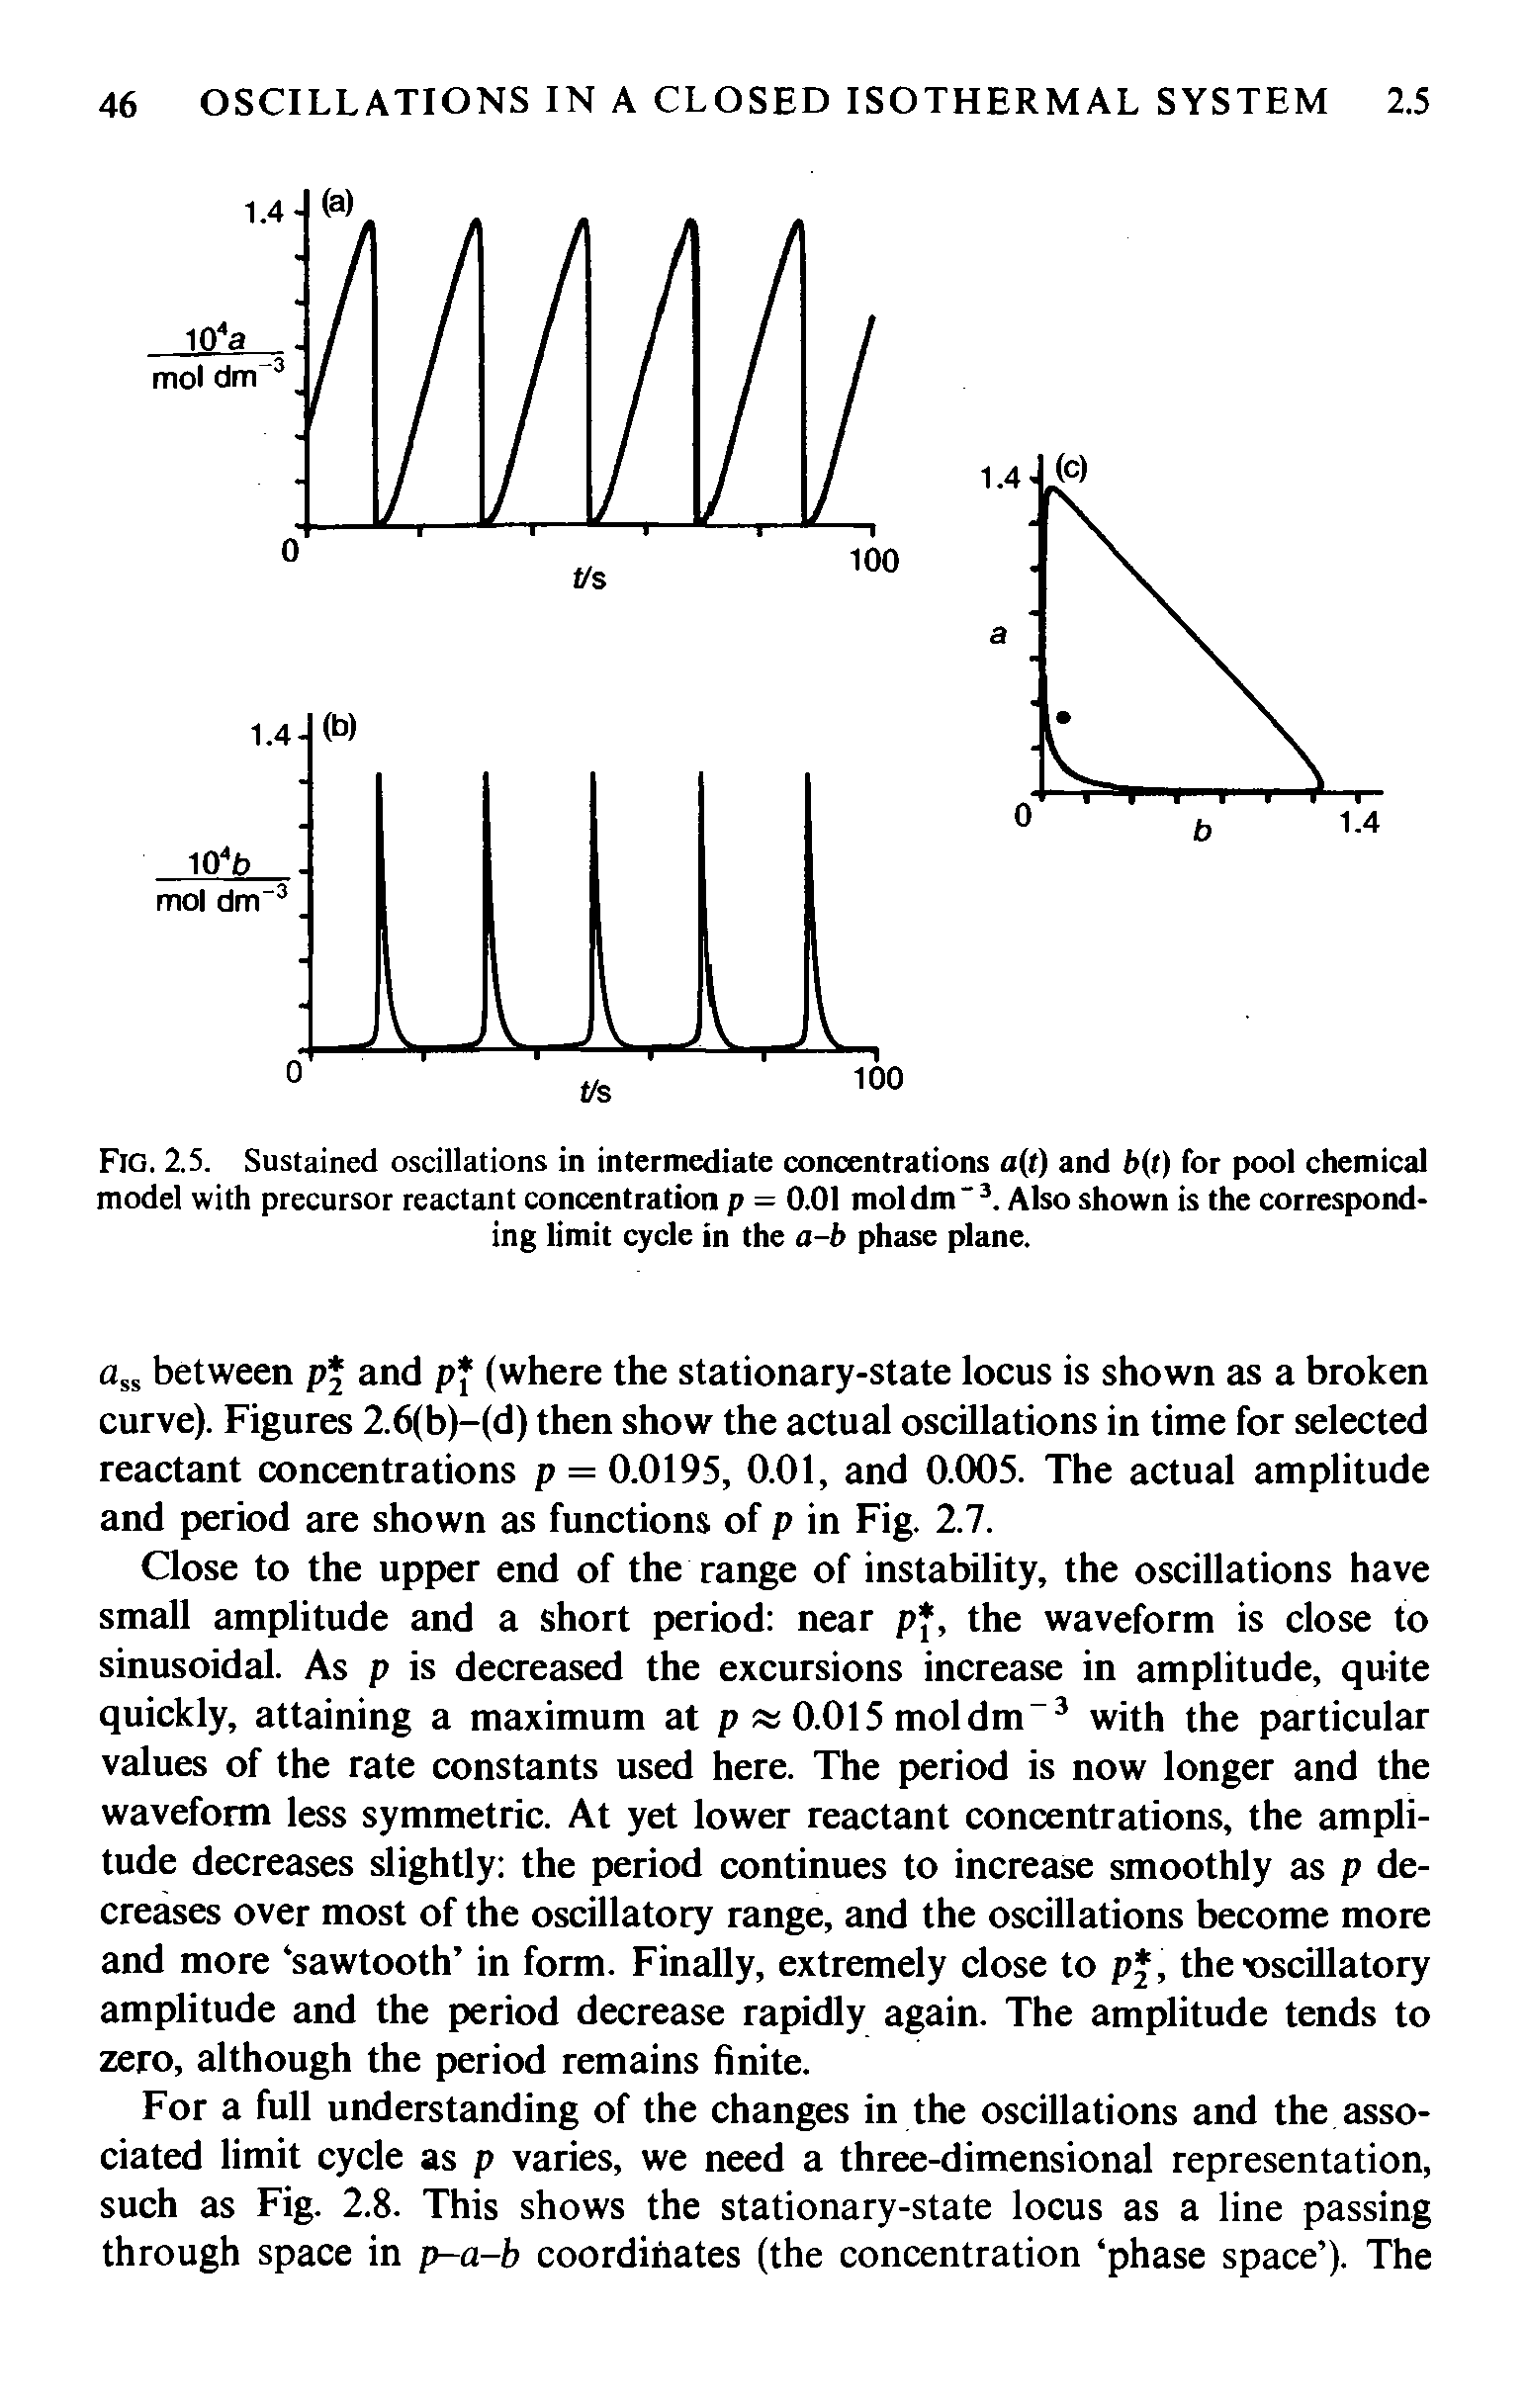 Fig. 2.5. Sustained oscillations in intermediate concentrations a(t) and bit) for pool chemical model with precursor reactant concentration p = 0.01 mol dm"3. Also shown is the corresponding limit cycle in the a-b phase plane.